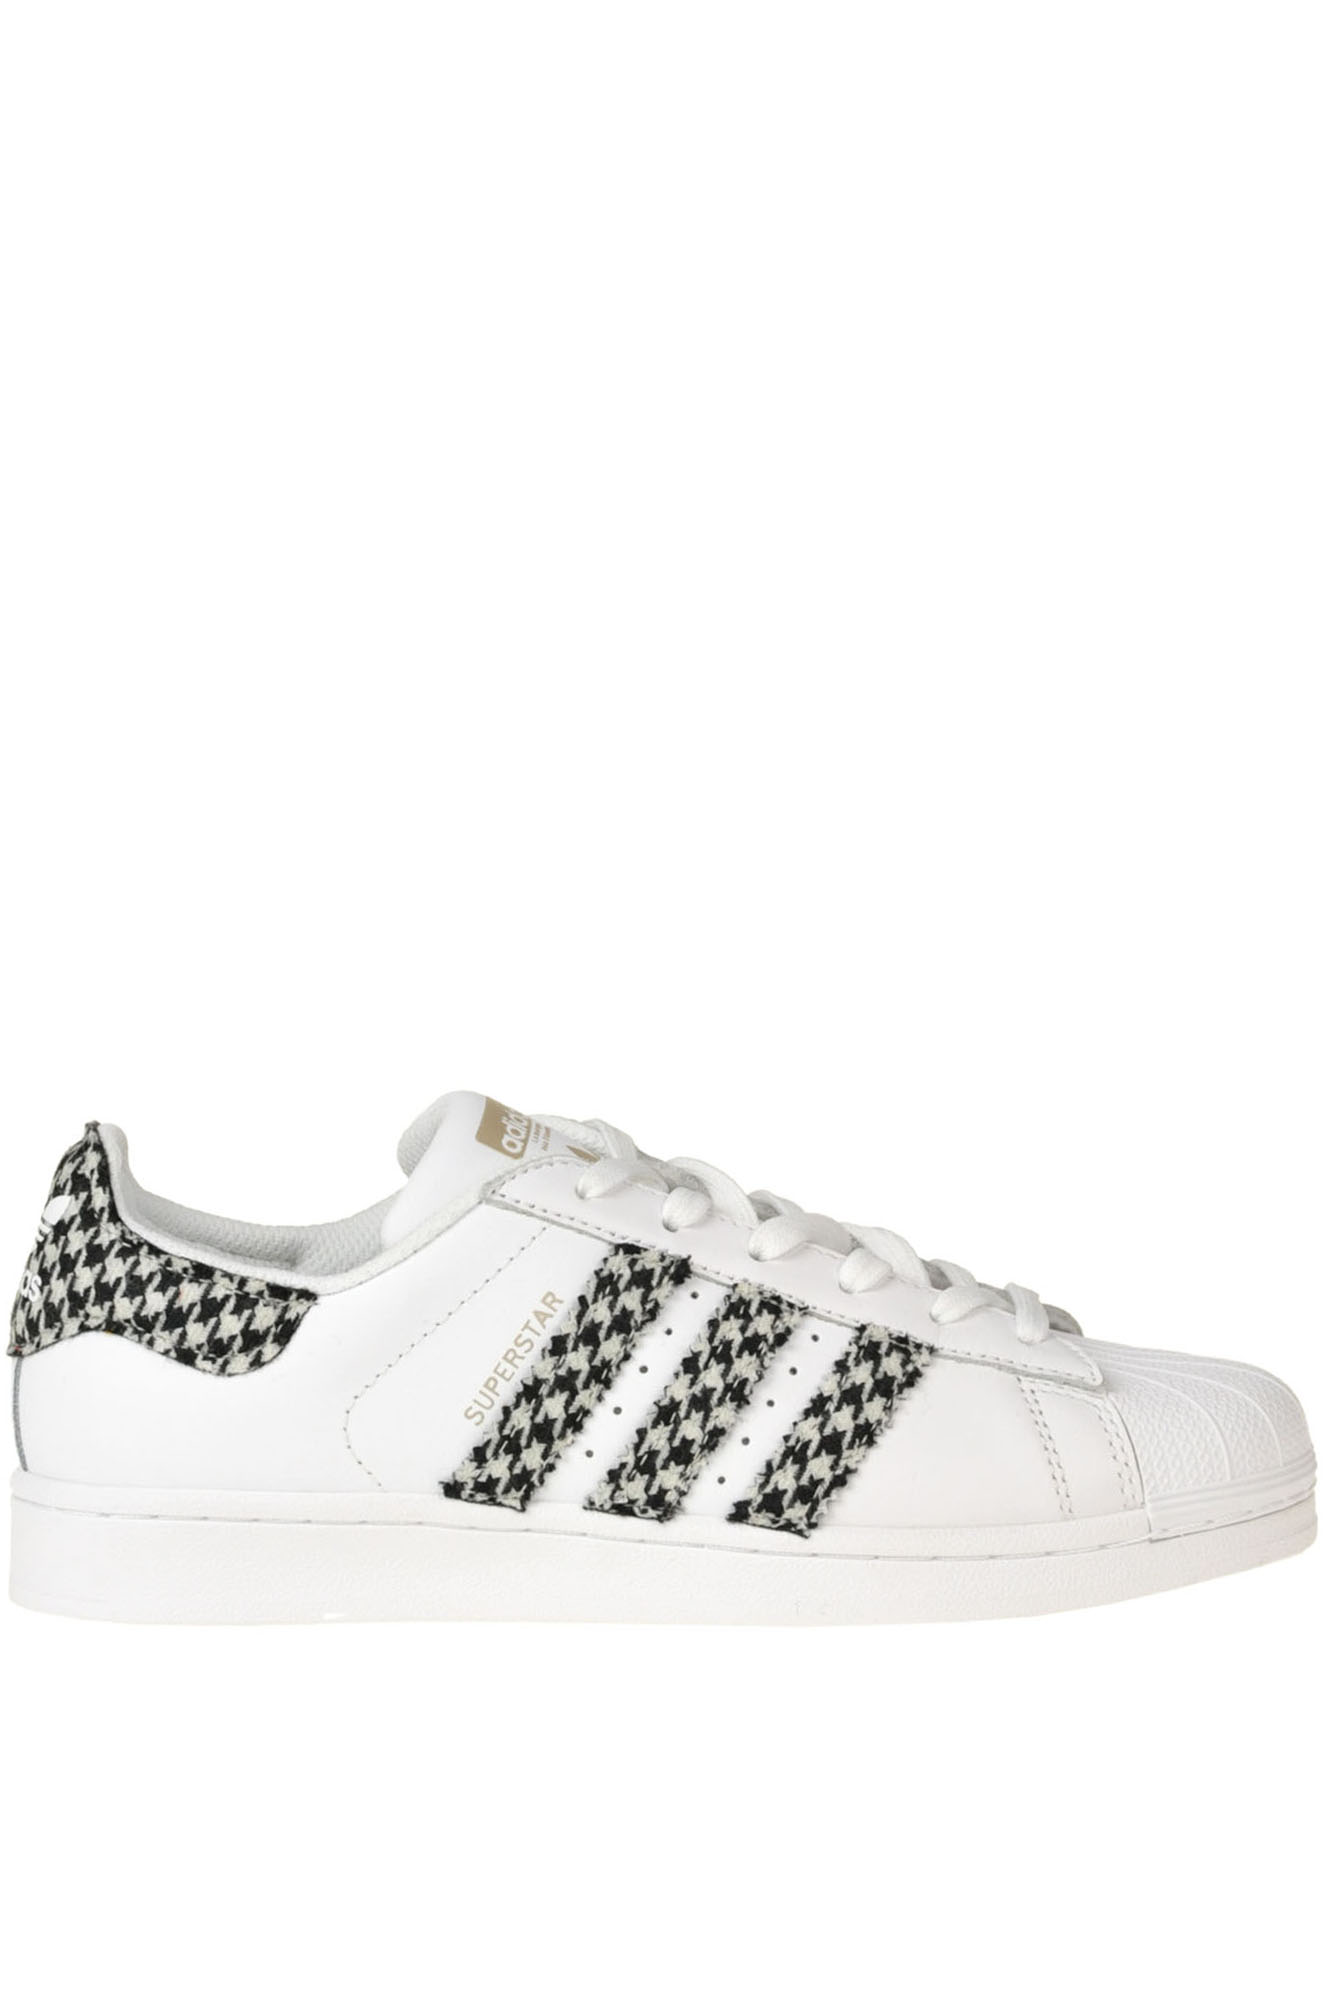 Shop Adidas By Dressed Superstar Customized Sneakers In White